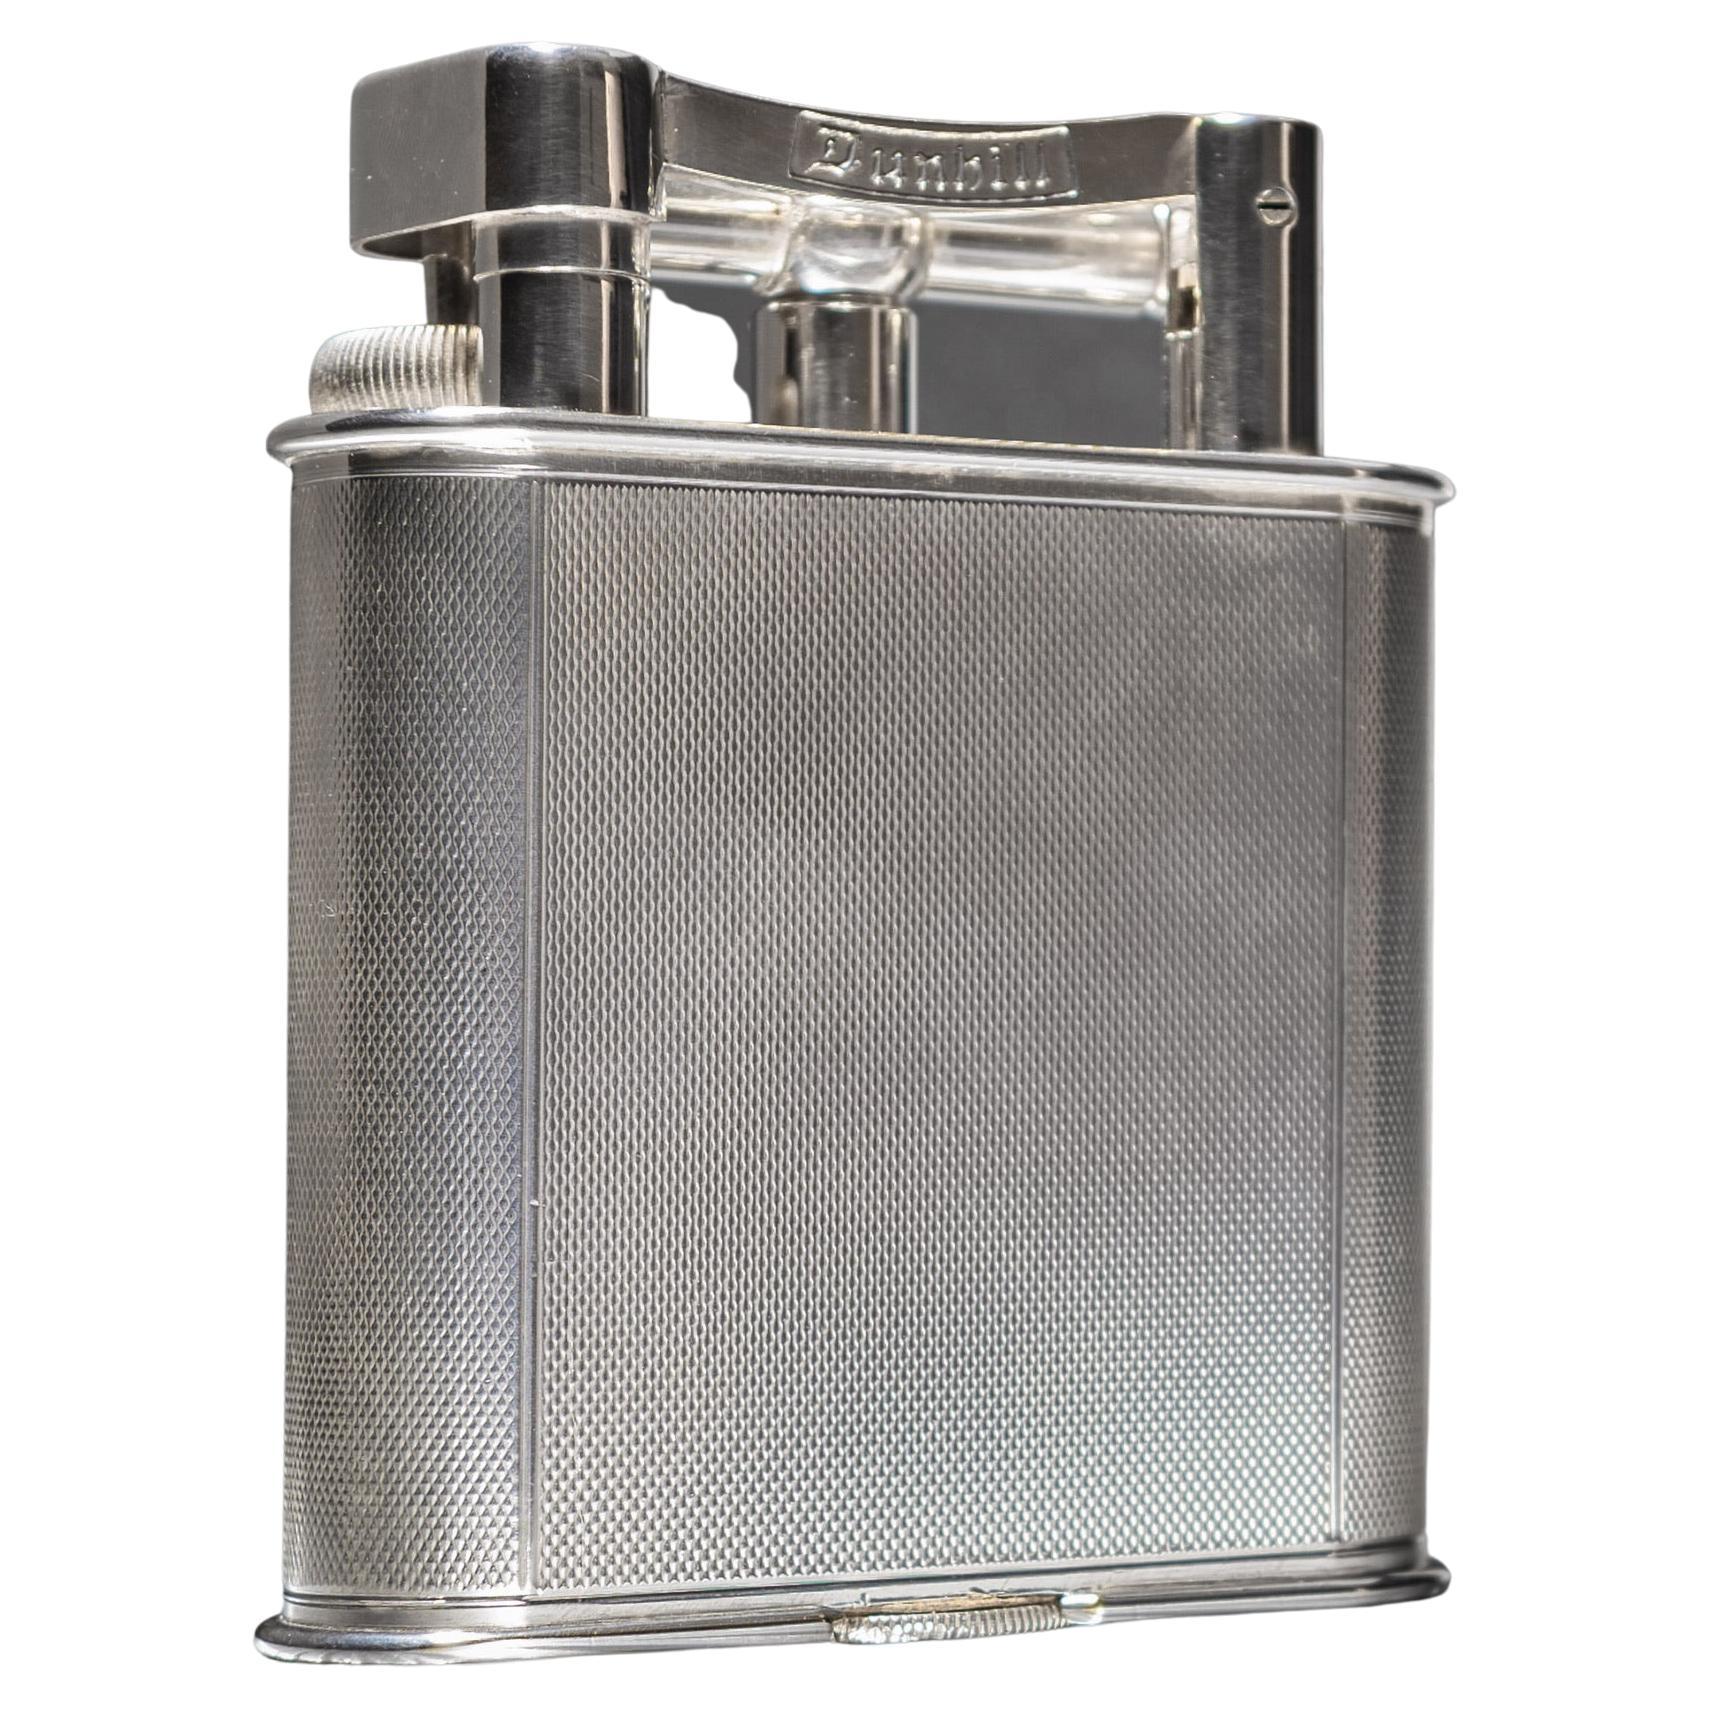 Dunhill 'Giant' Lighter with Silver Plated Engine Turned Finish, circa 1948